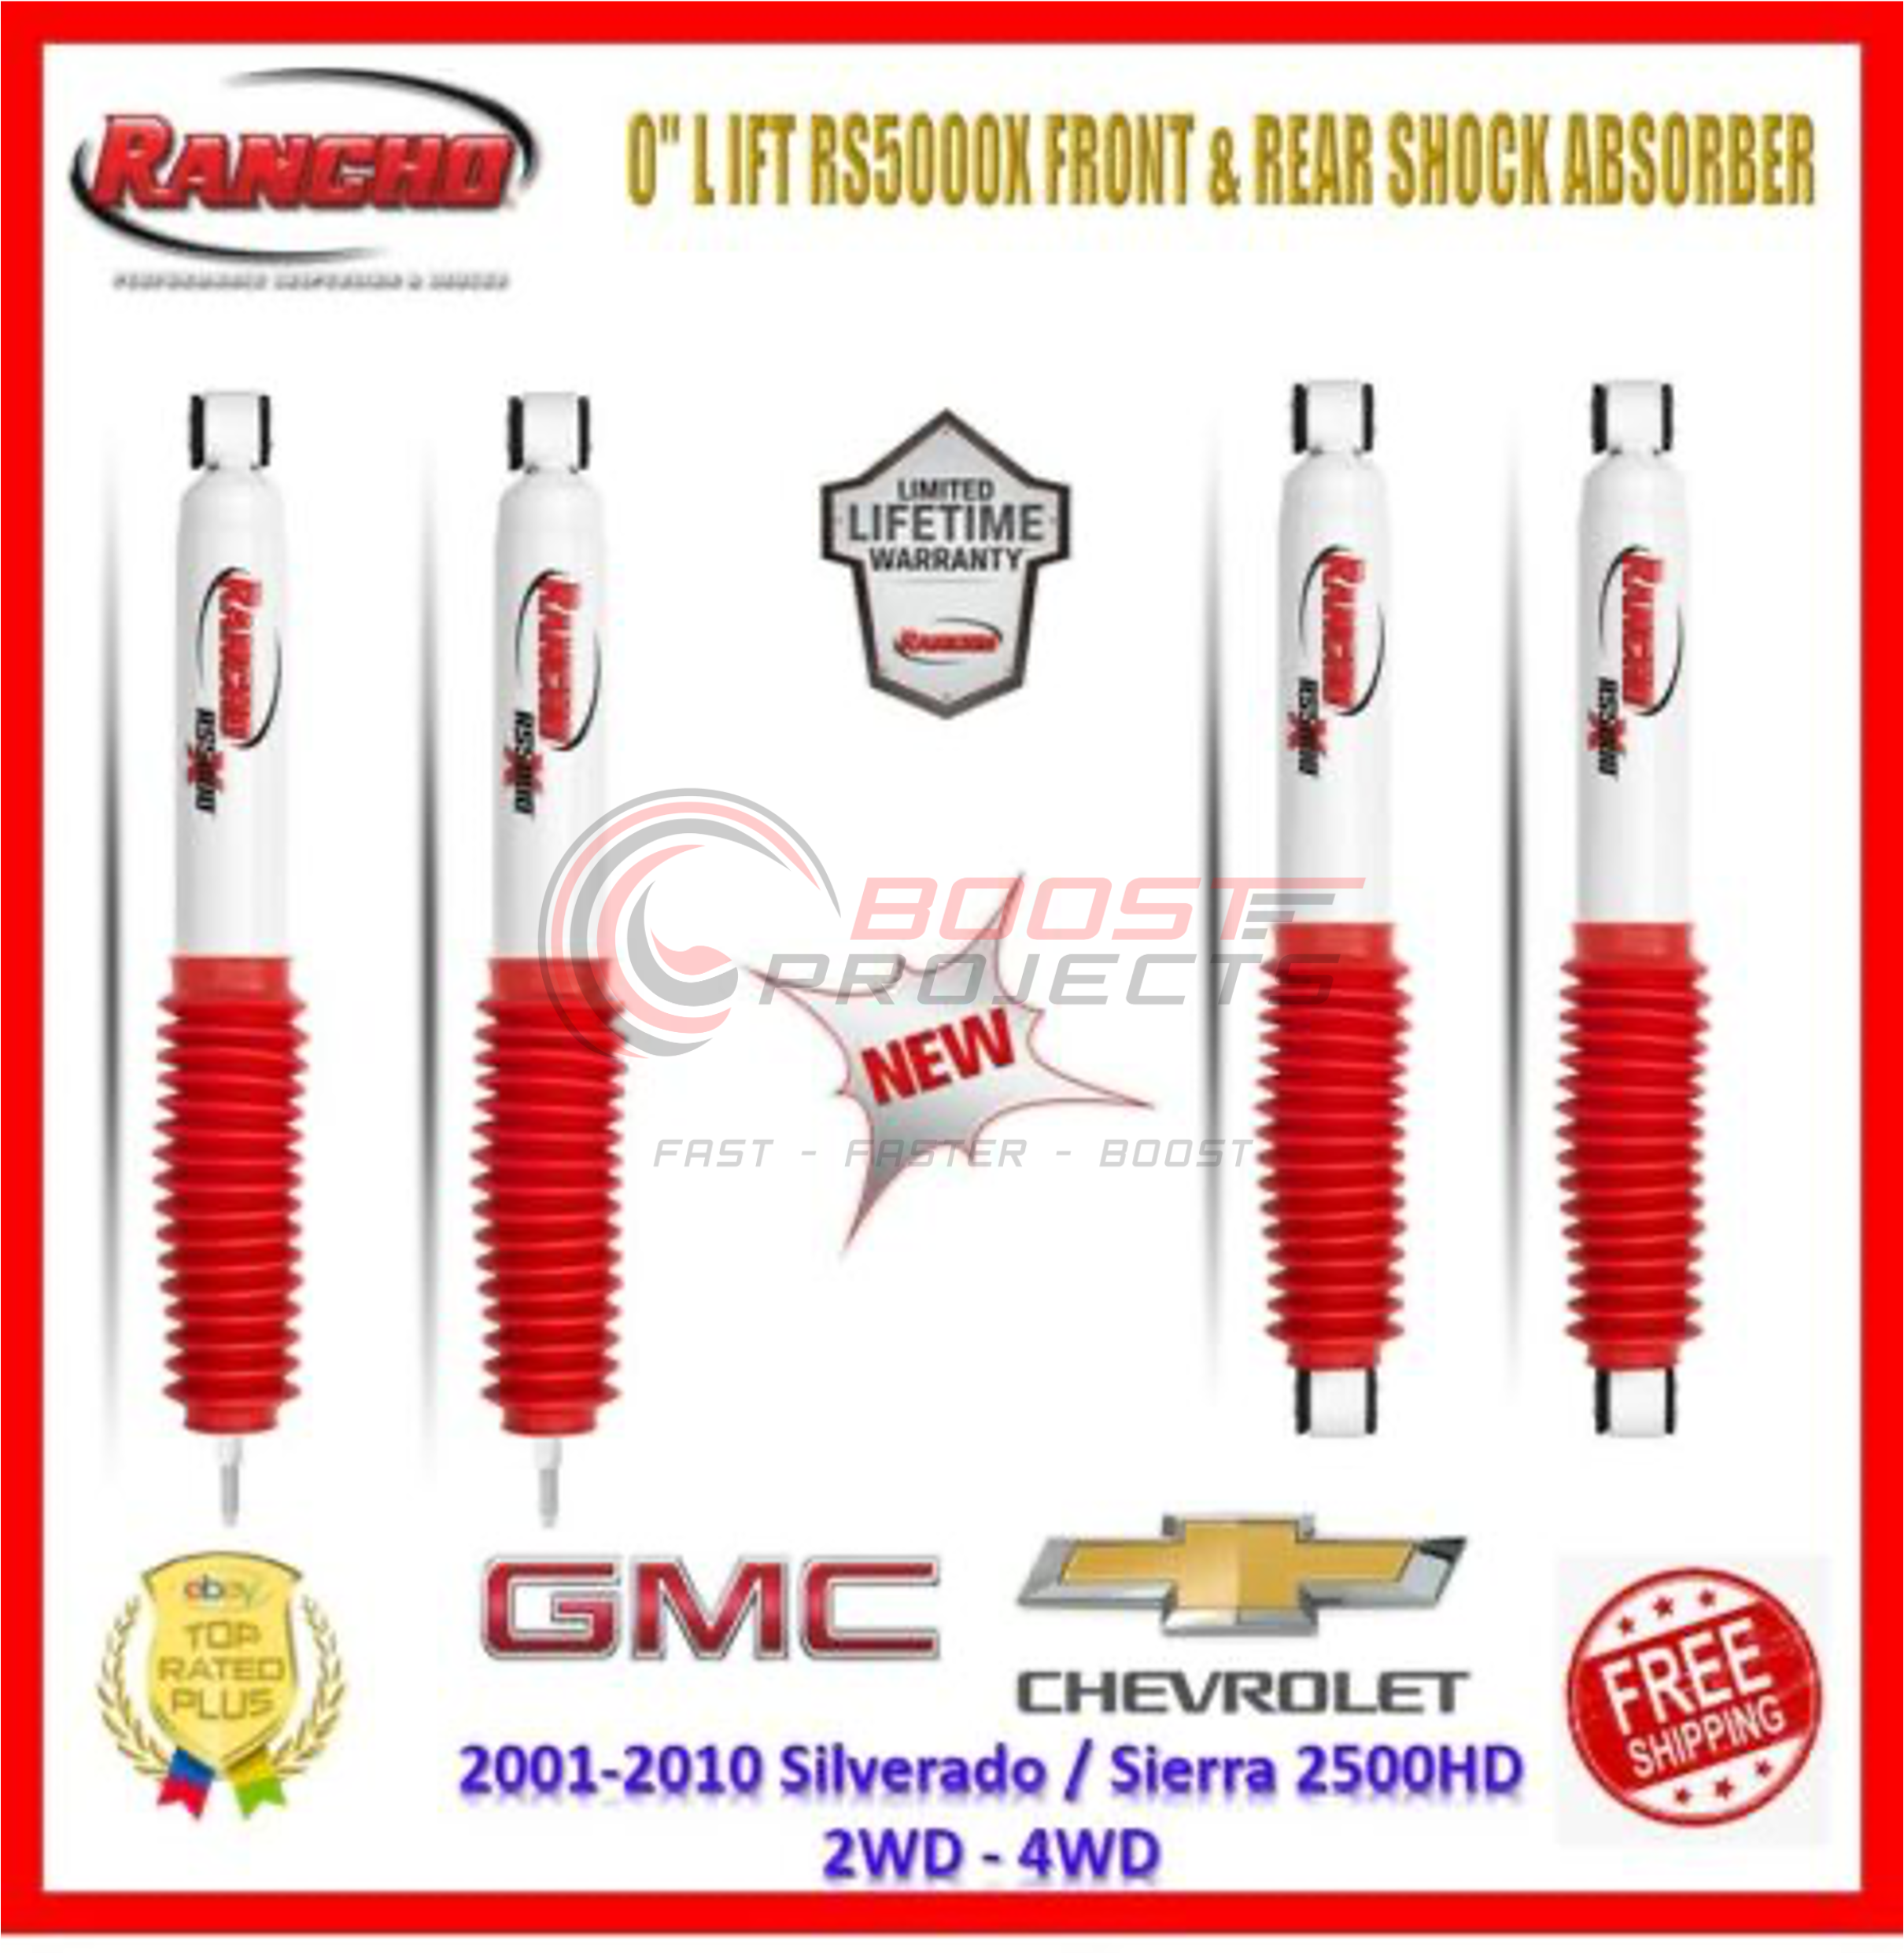 Rancho RS55288 RS55274 Front Rear RS5000X Shock Absorber Chevy Chevrolet GMC Silverado Sierra 2500 HD